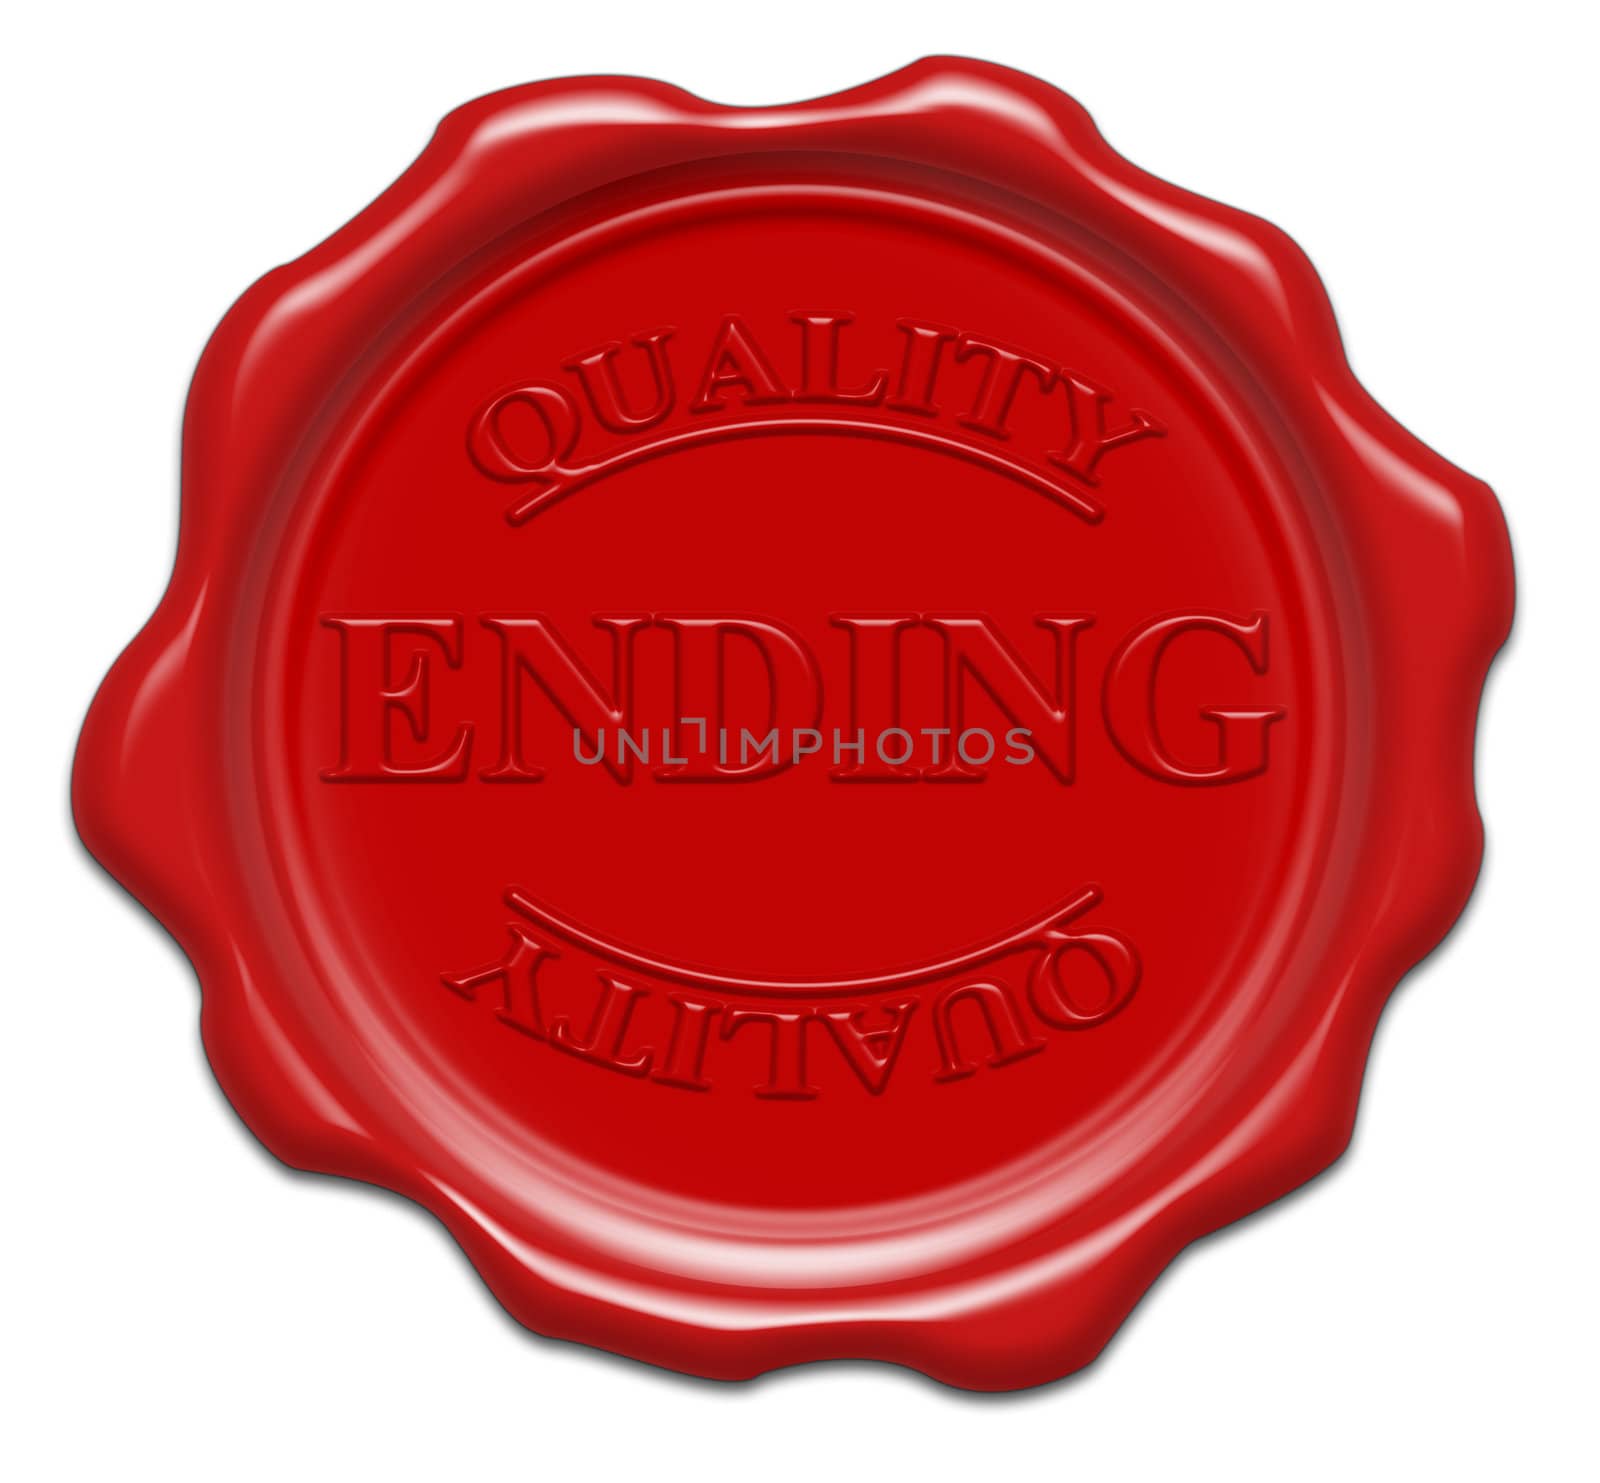 quality ending - illustration red wax seal isolated on white bac by mozzyb